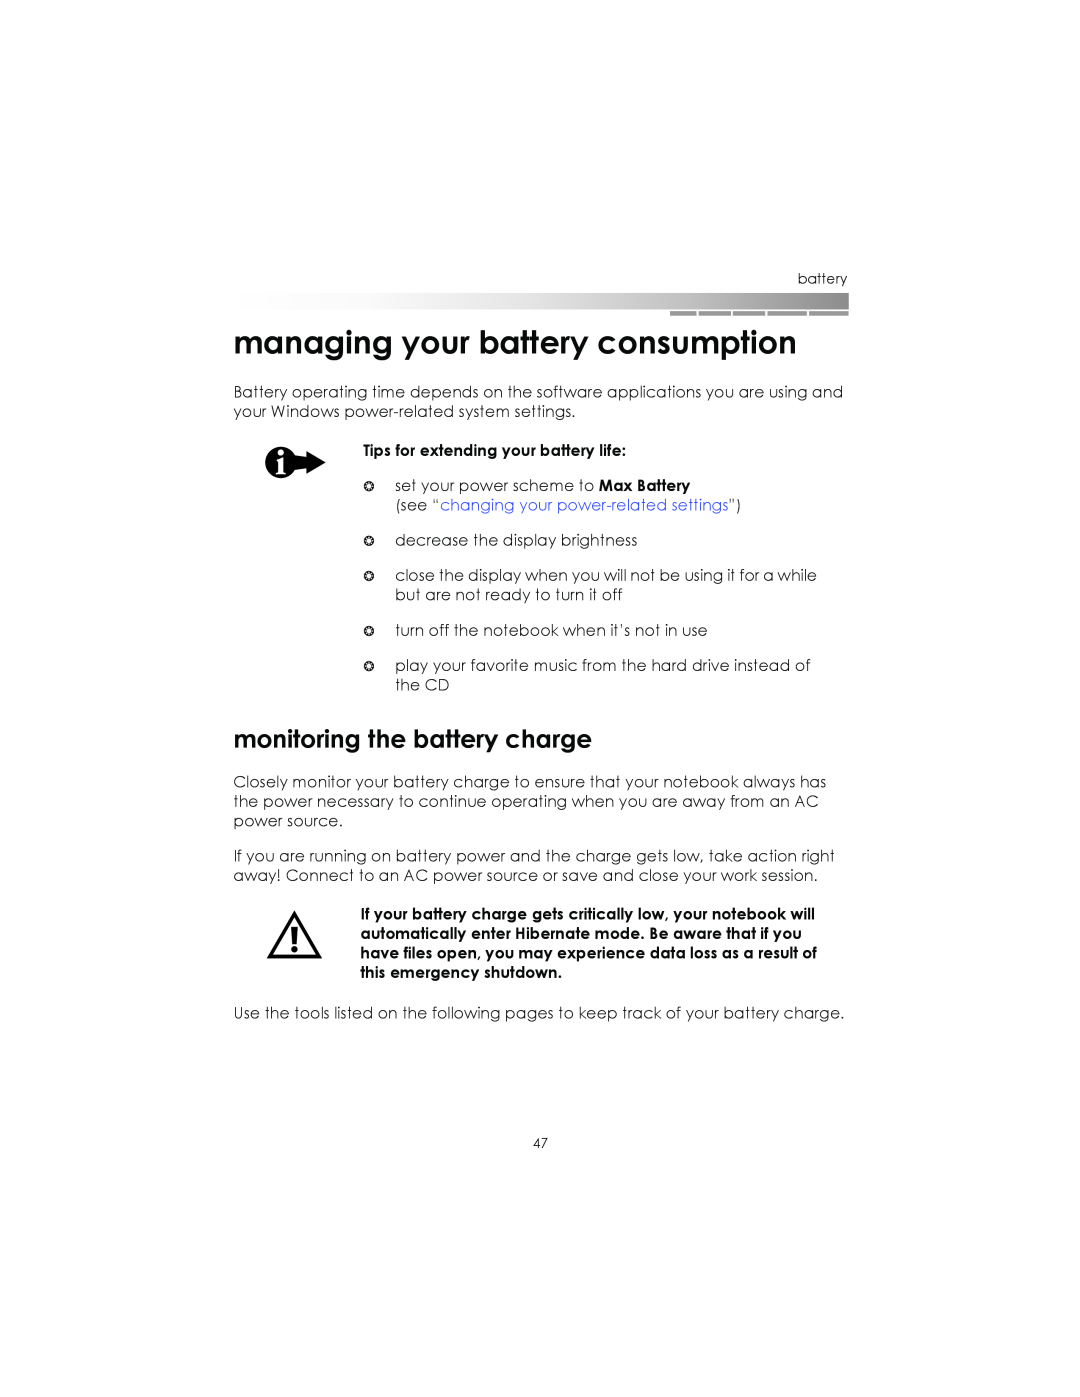 eMachines AAFW53700001K0 manual managing your battery consumption, monitoring the battery charge 